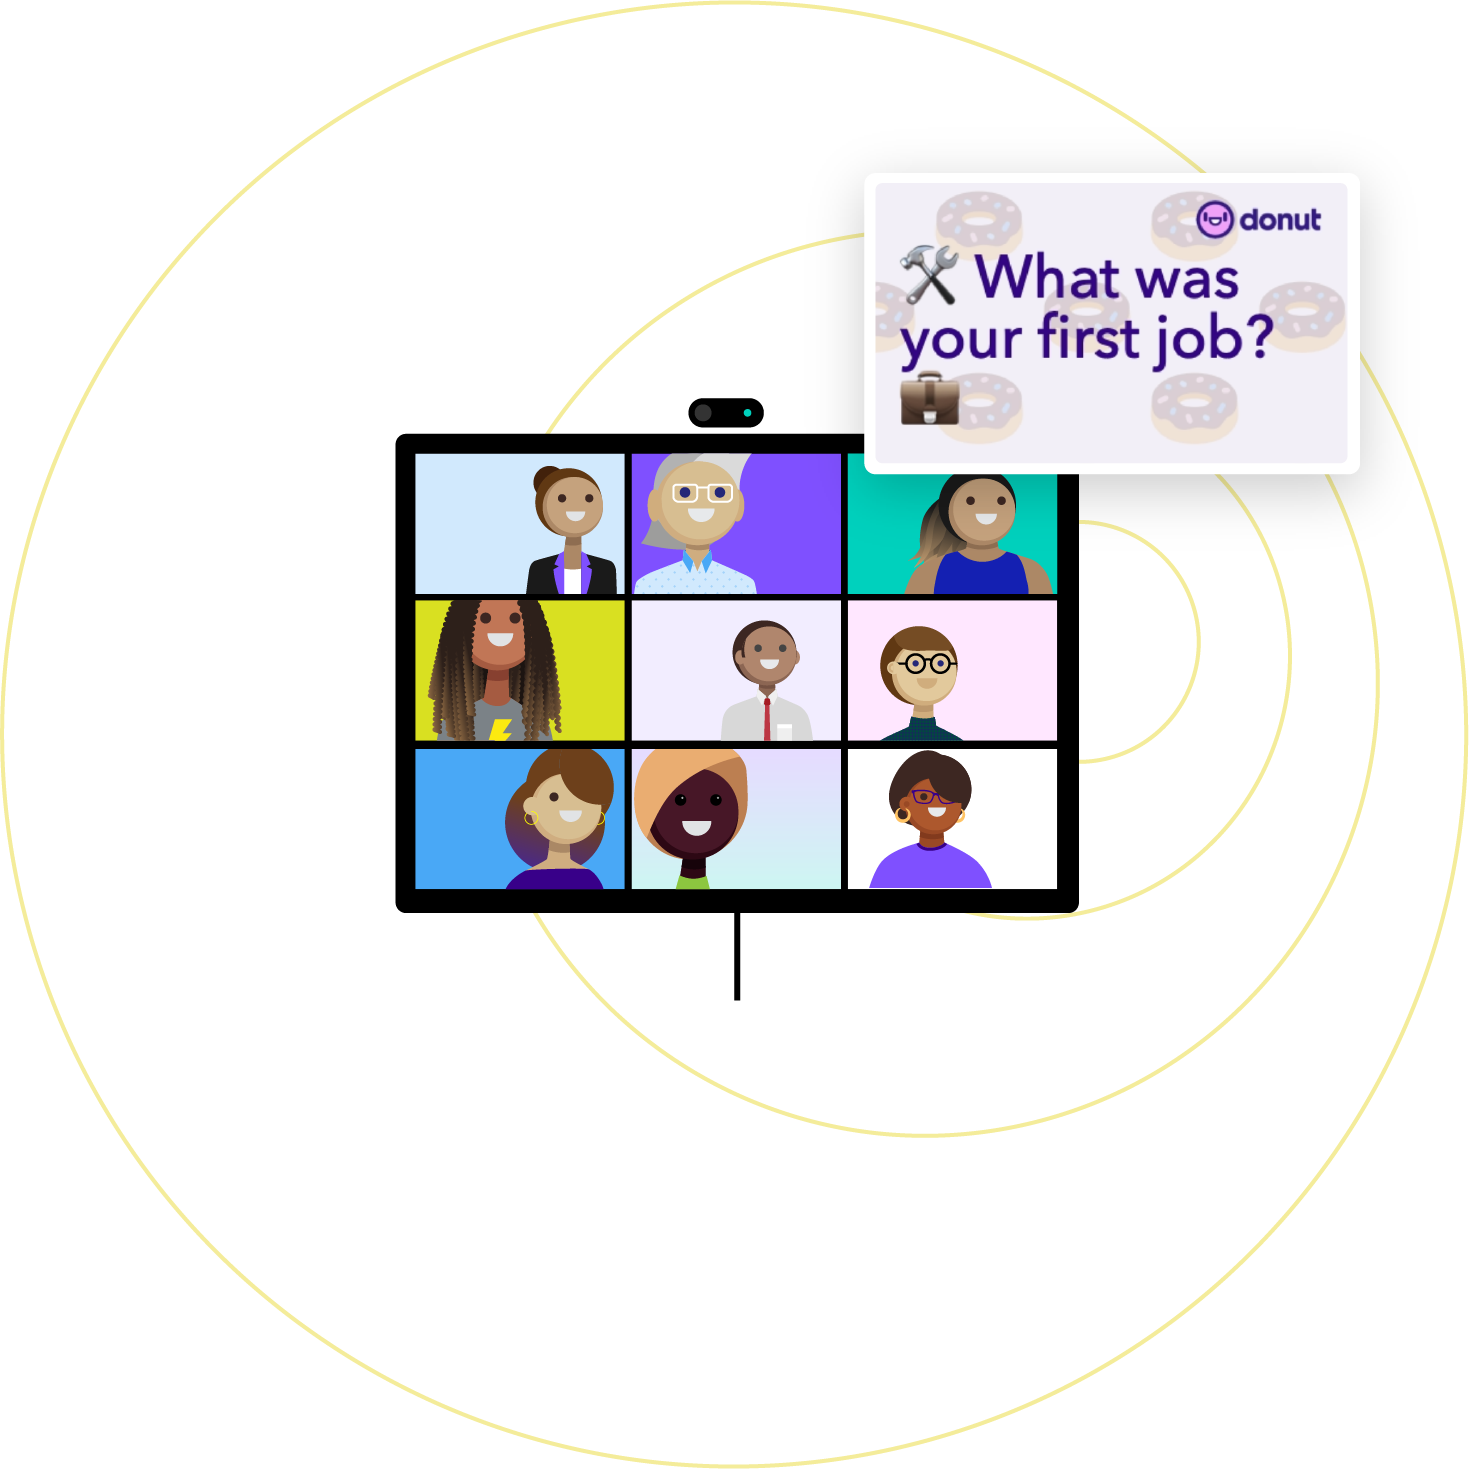 Illustration of a computer monitor showing a Zoom meeting with particpants appearing in a grid of videos. A prompt from Donut appears in the top right corner.